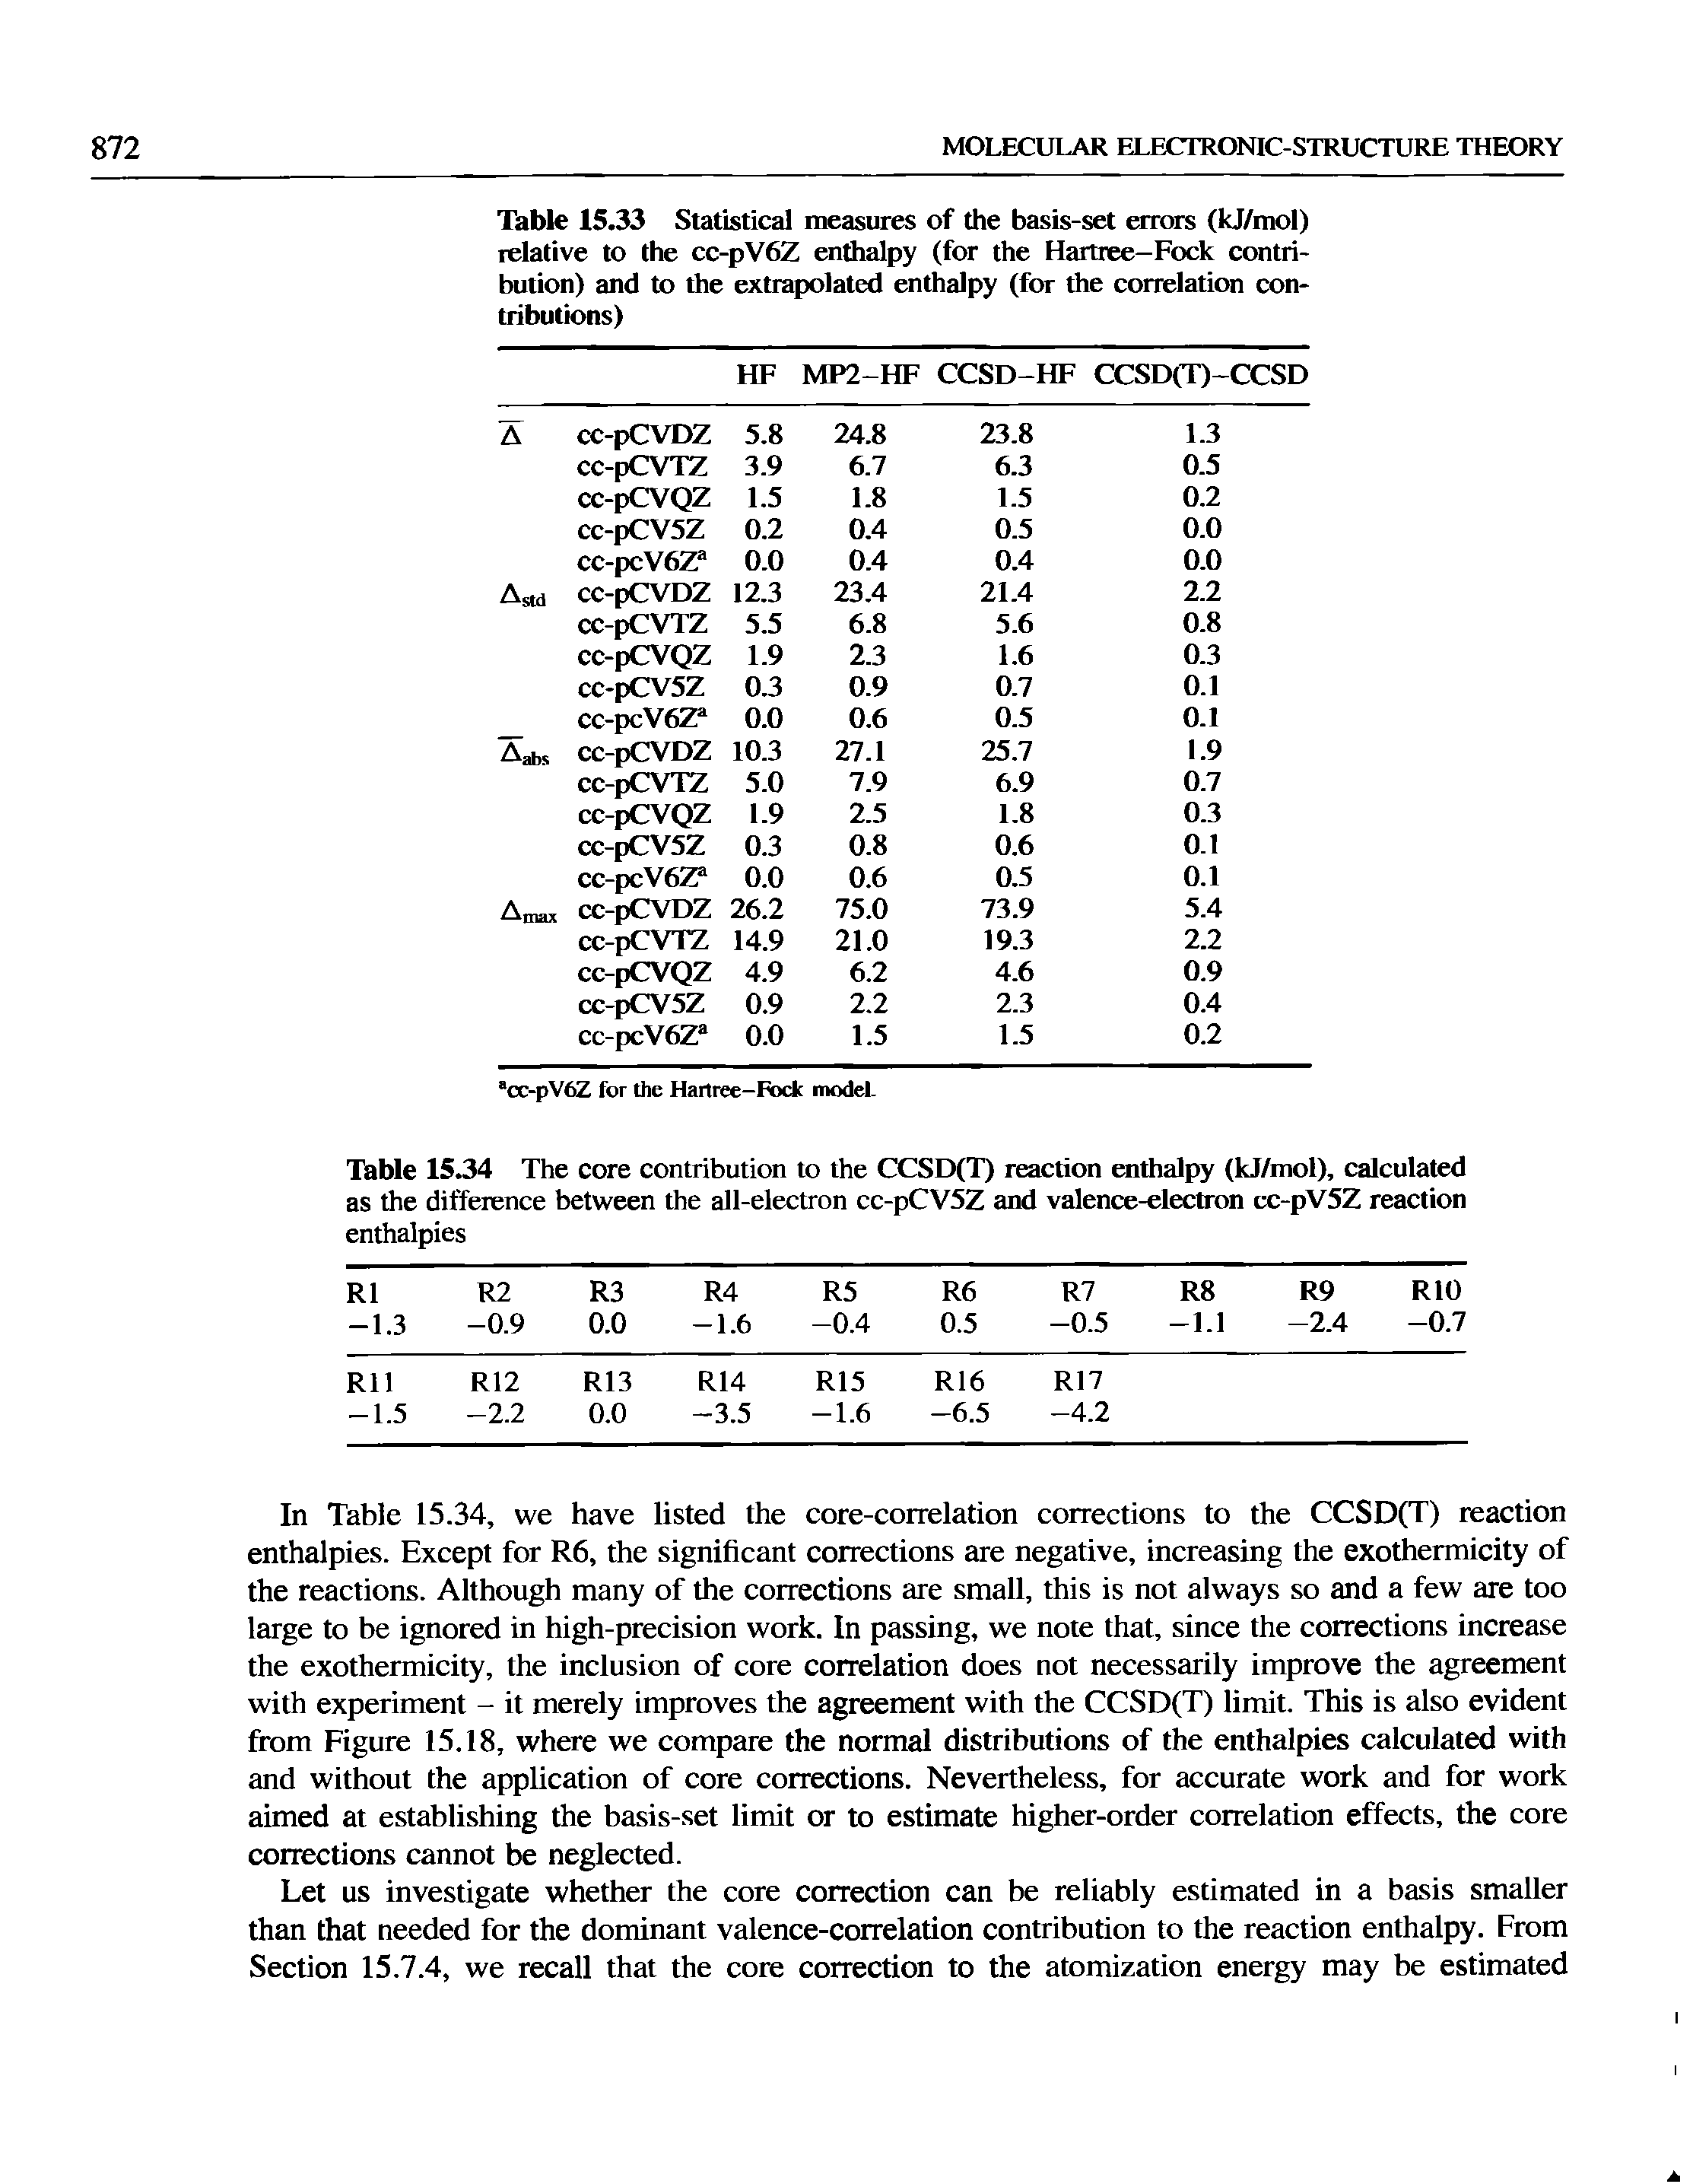 Table 1533 Statistical measures of the basis-set errors (kj/mol) relative to the cc-pV6Z enthalpy (for the Haitree-Fock contribution) and to the extrapolated enthalpy (for the correlation contributions)...